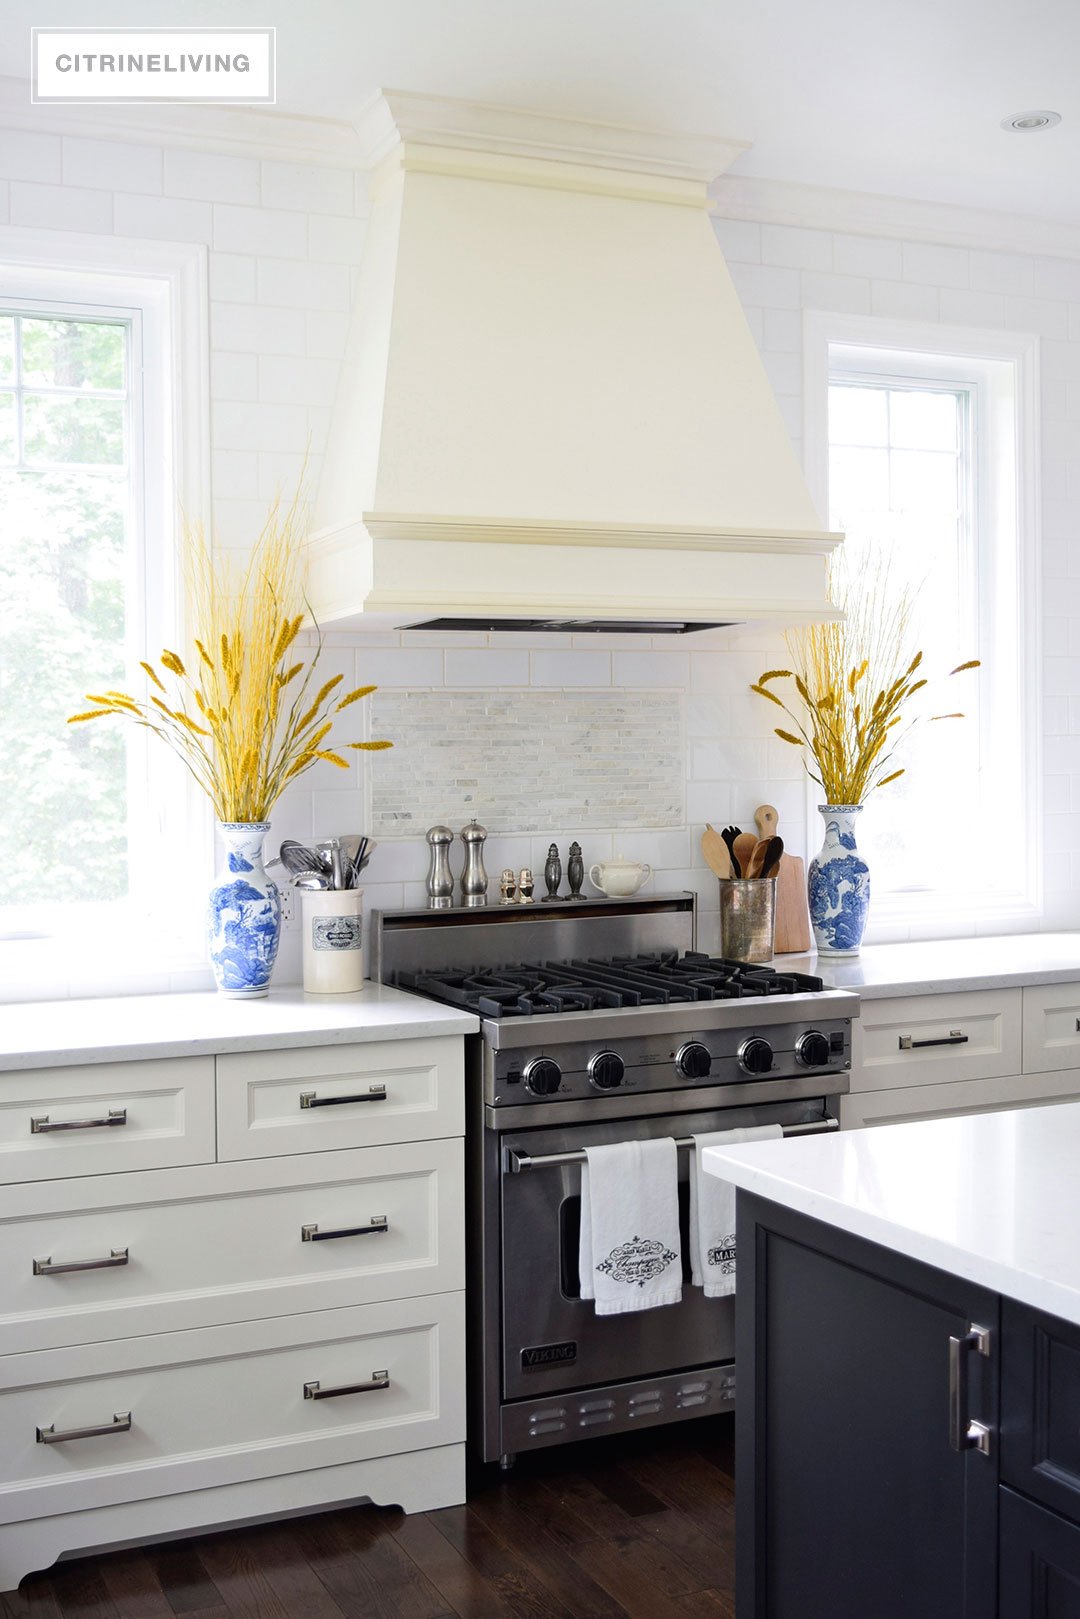 Fall decorated kitchen with blue and white ginger jars, rich gold accents and figs as a decorative element